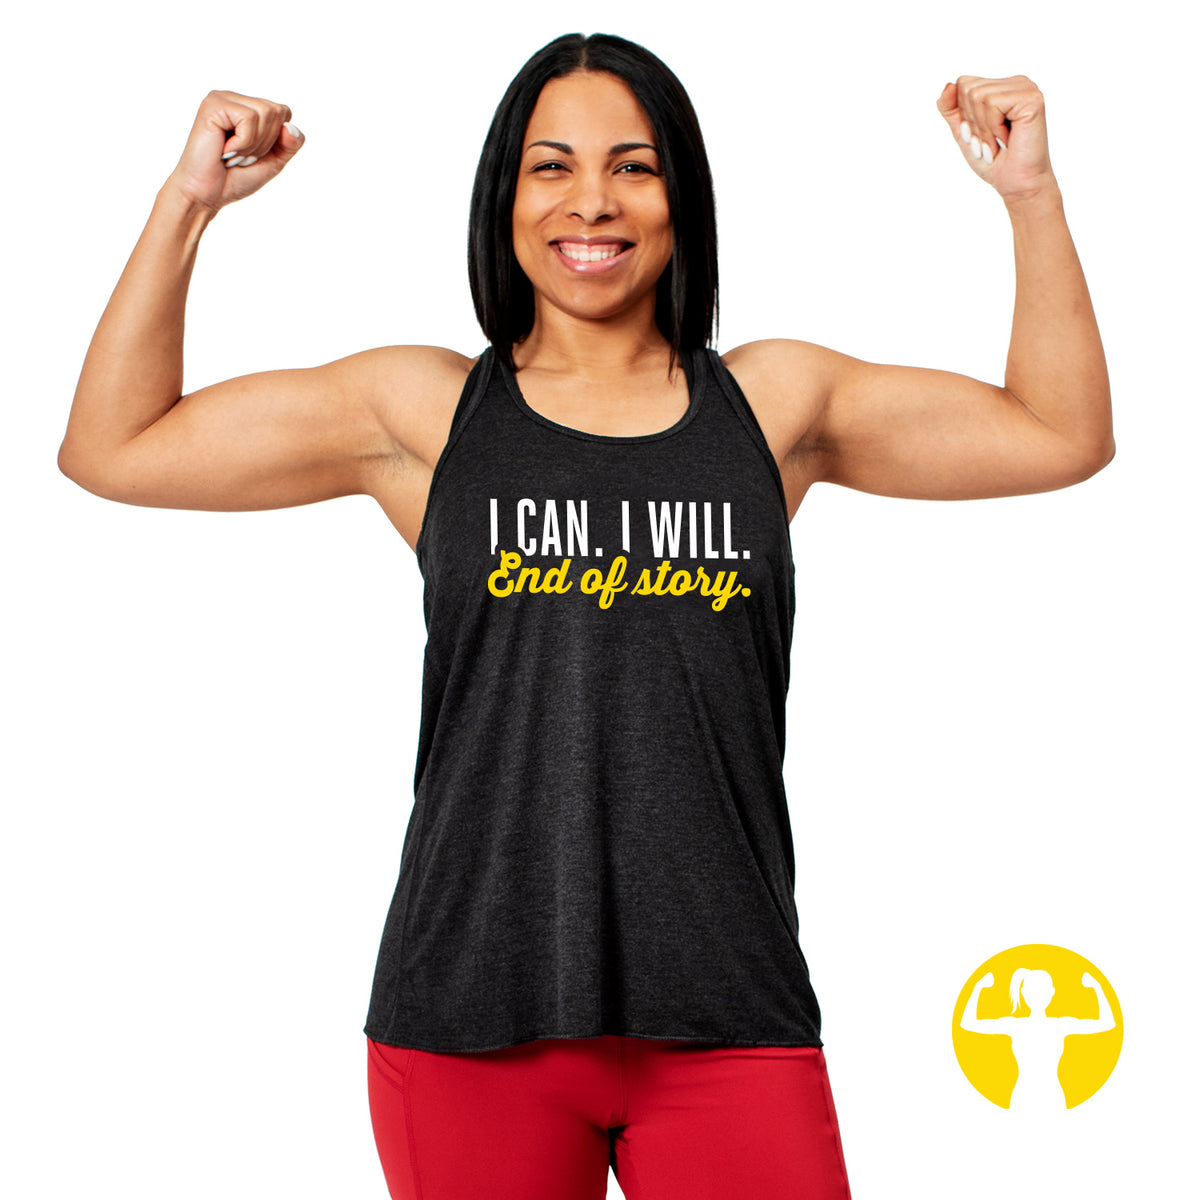 Workout Shirts, Workout Tanks for Women, Workout Motivation, Funny Workout  Tanks for Women, Sweat It Out, Fitness Tanks, Gym Shirt, Gym Tank -   Canada